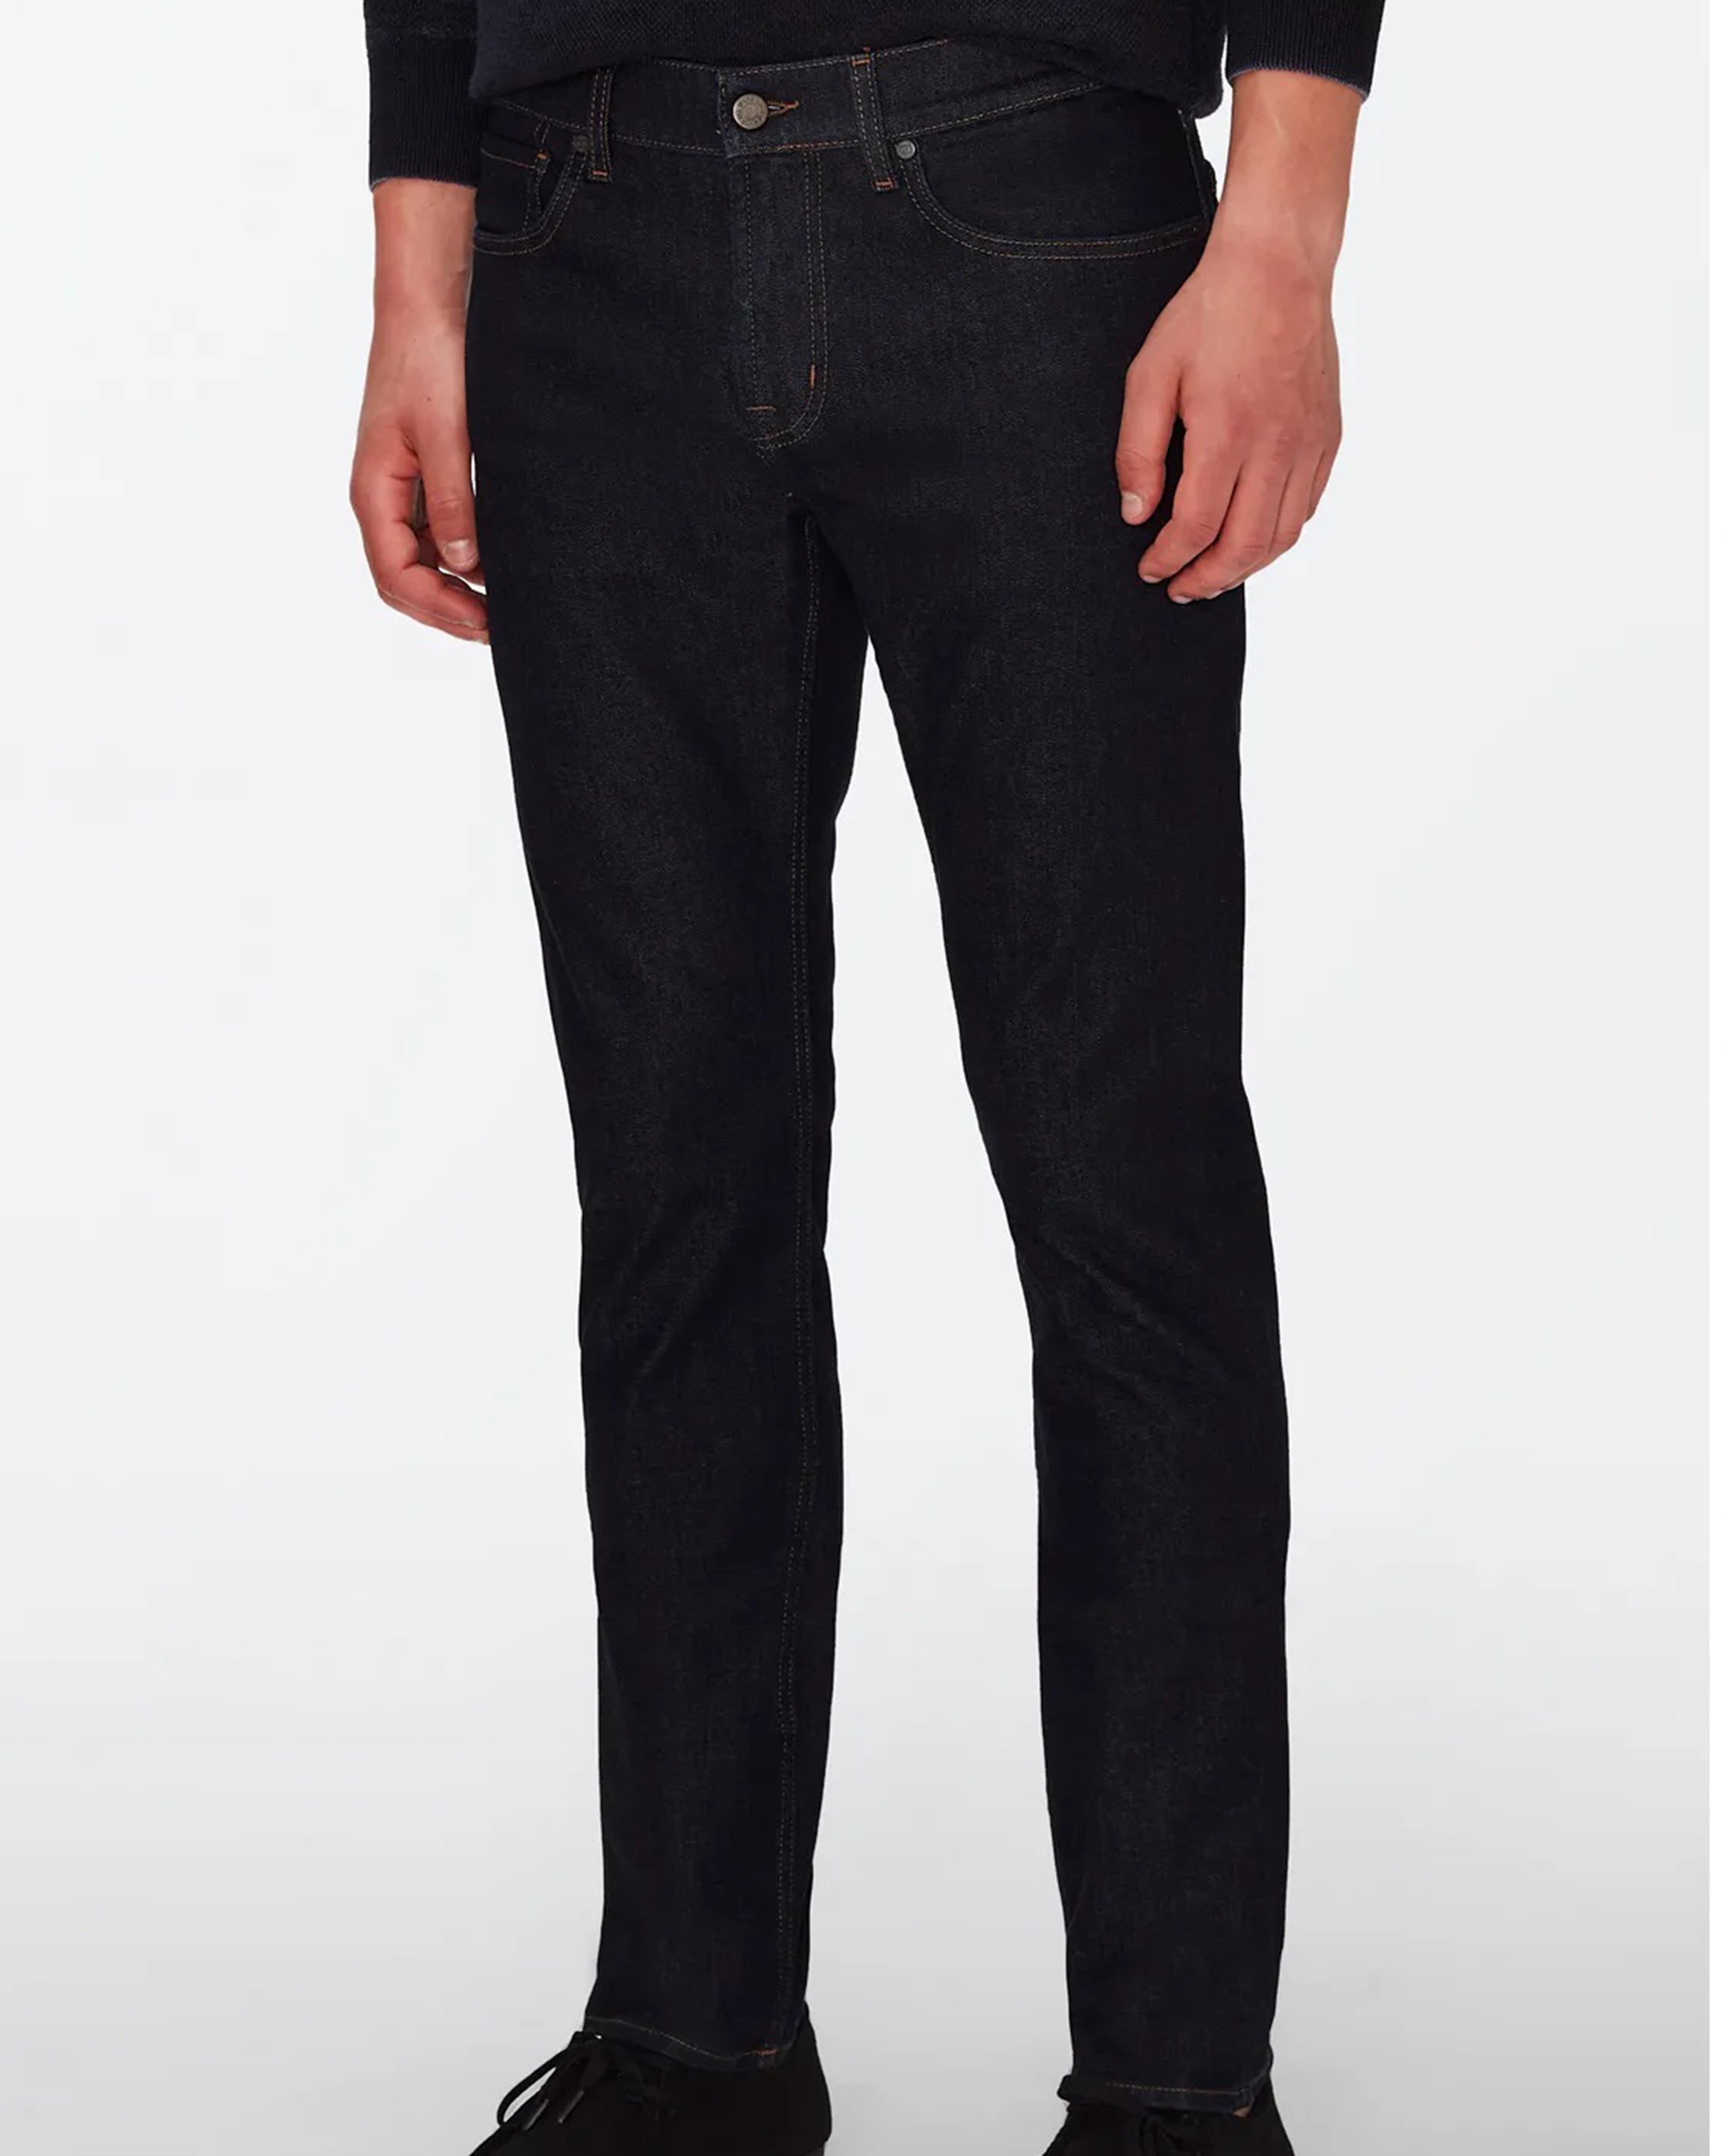 7 FOR ALL MANKIND - SLIMMY Luxe Performance Eco Super Rinse Dark Blue Jeans JSMSB800RB